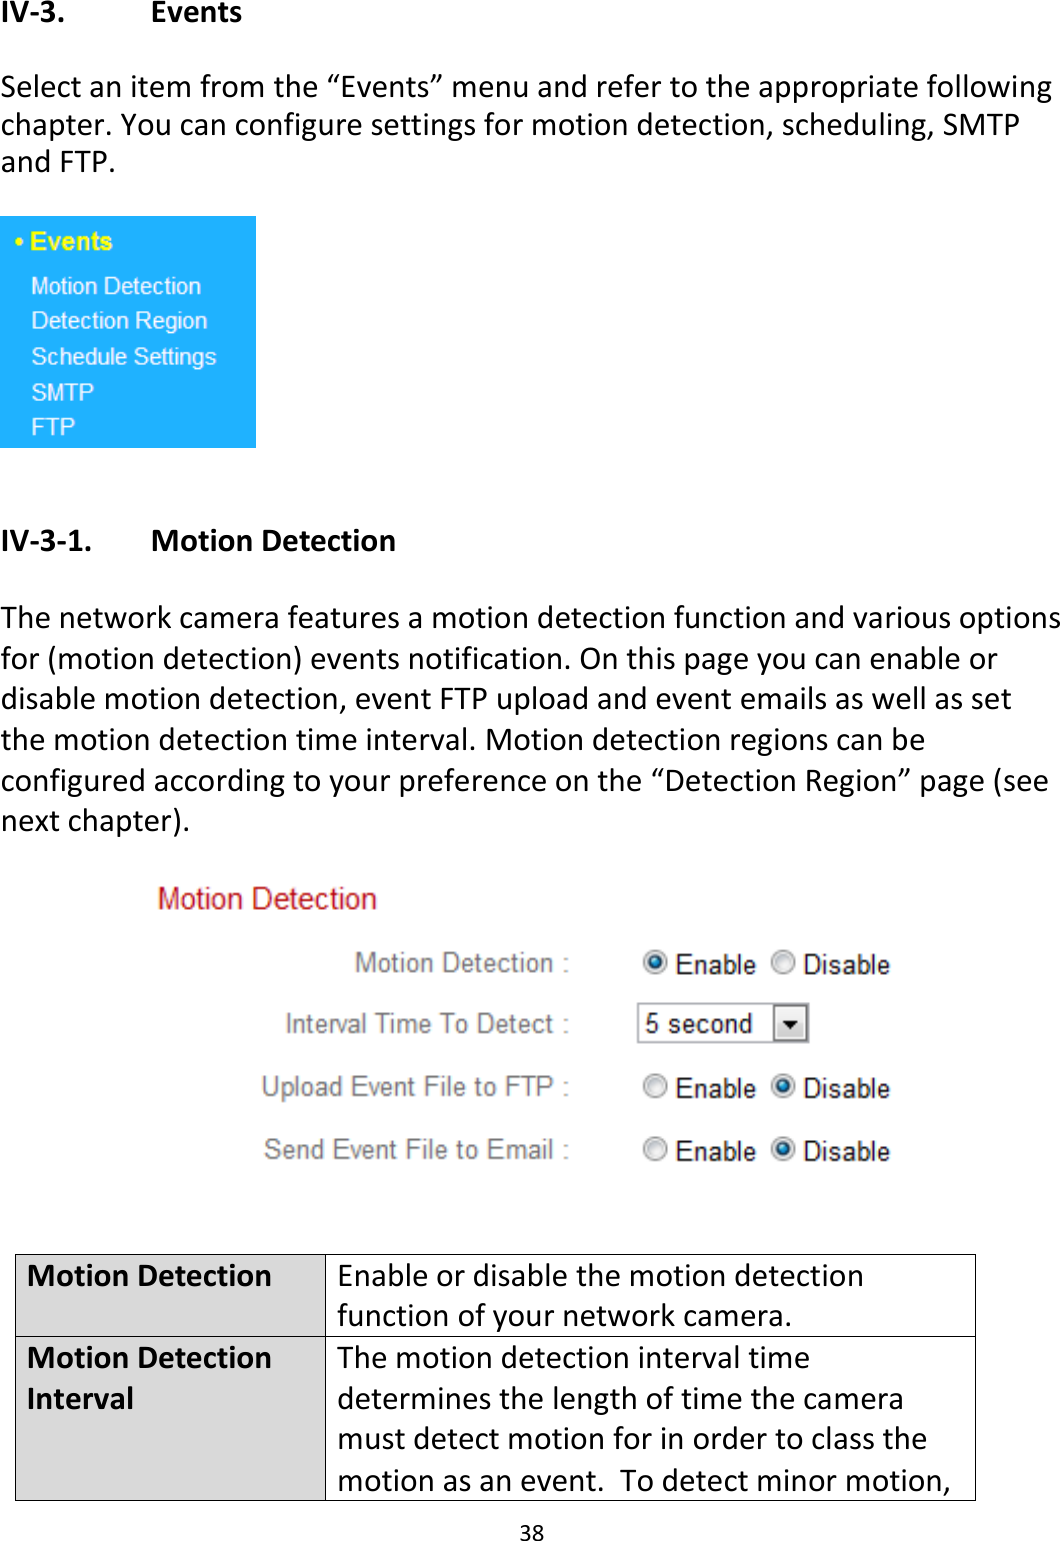 38  IV-3.    Events  Select an item from the “Events” menu and refer to the appropriate following chapter. You can configure settings for motion detection, scheduling, SMTP and FTP.   IV-3-1.   Motion Detection  The network camera features a motion detection function and various options for (motion detection) events notification. On this page you can enable or disable motion detection, event FTP upload and event emails as well as set the motion detection time interval. Motion detection regions can be configured according to your preference on the “Detection Region” page (see next chapter).   Motion Detection Enable or disable the motion detection function of your network camera. Motion Detection Interval The motion detection interval time determines the length of time the camera must detect motion for in order to class the motion as an event.  To detect minor motion, 